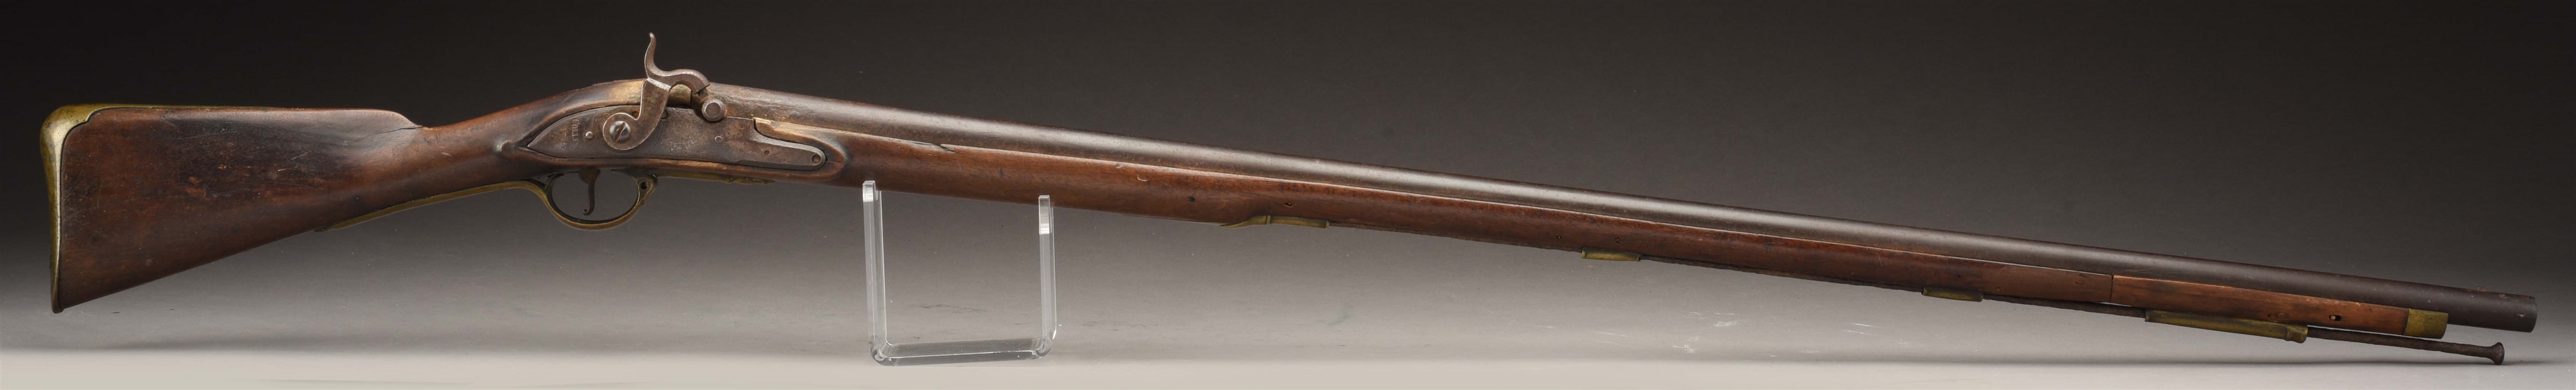 (A) AMERICAN RESTOCKED "LONG LAND" PATTERN 1756 FIRST MODEL BROWN BESS DATED 1764 BY COLLIN.